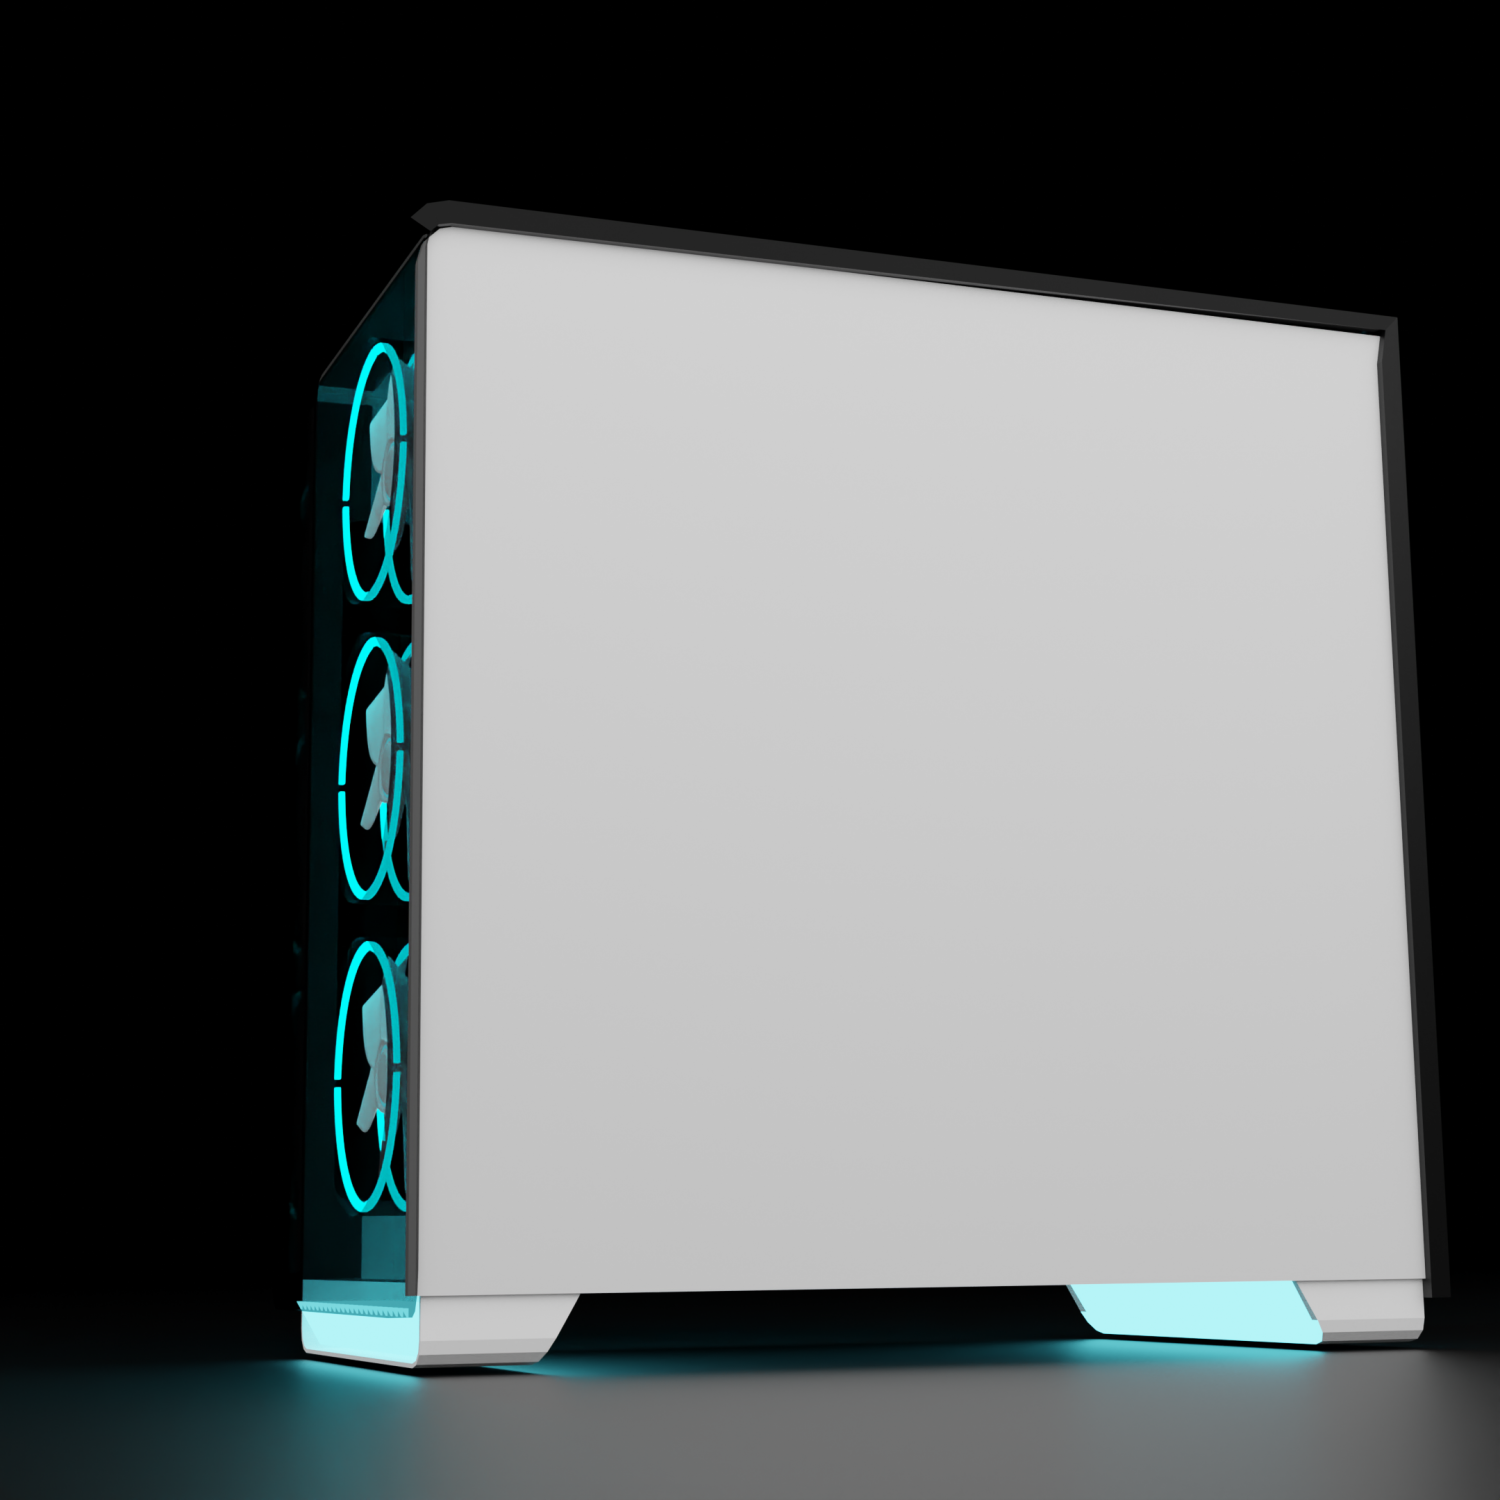 Nice Is A Gaming Pc Good For 3D Modeling with Epic Design ideas